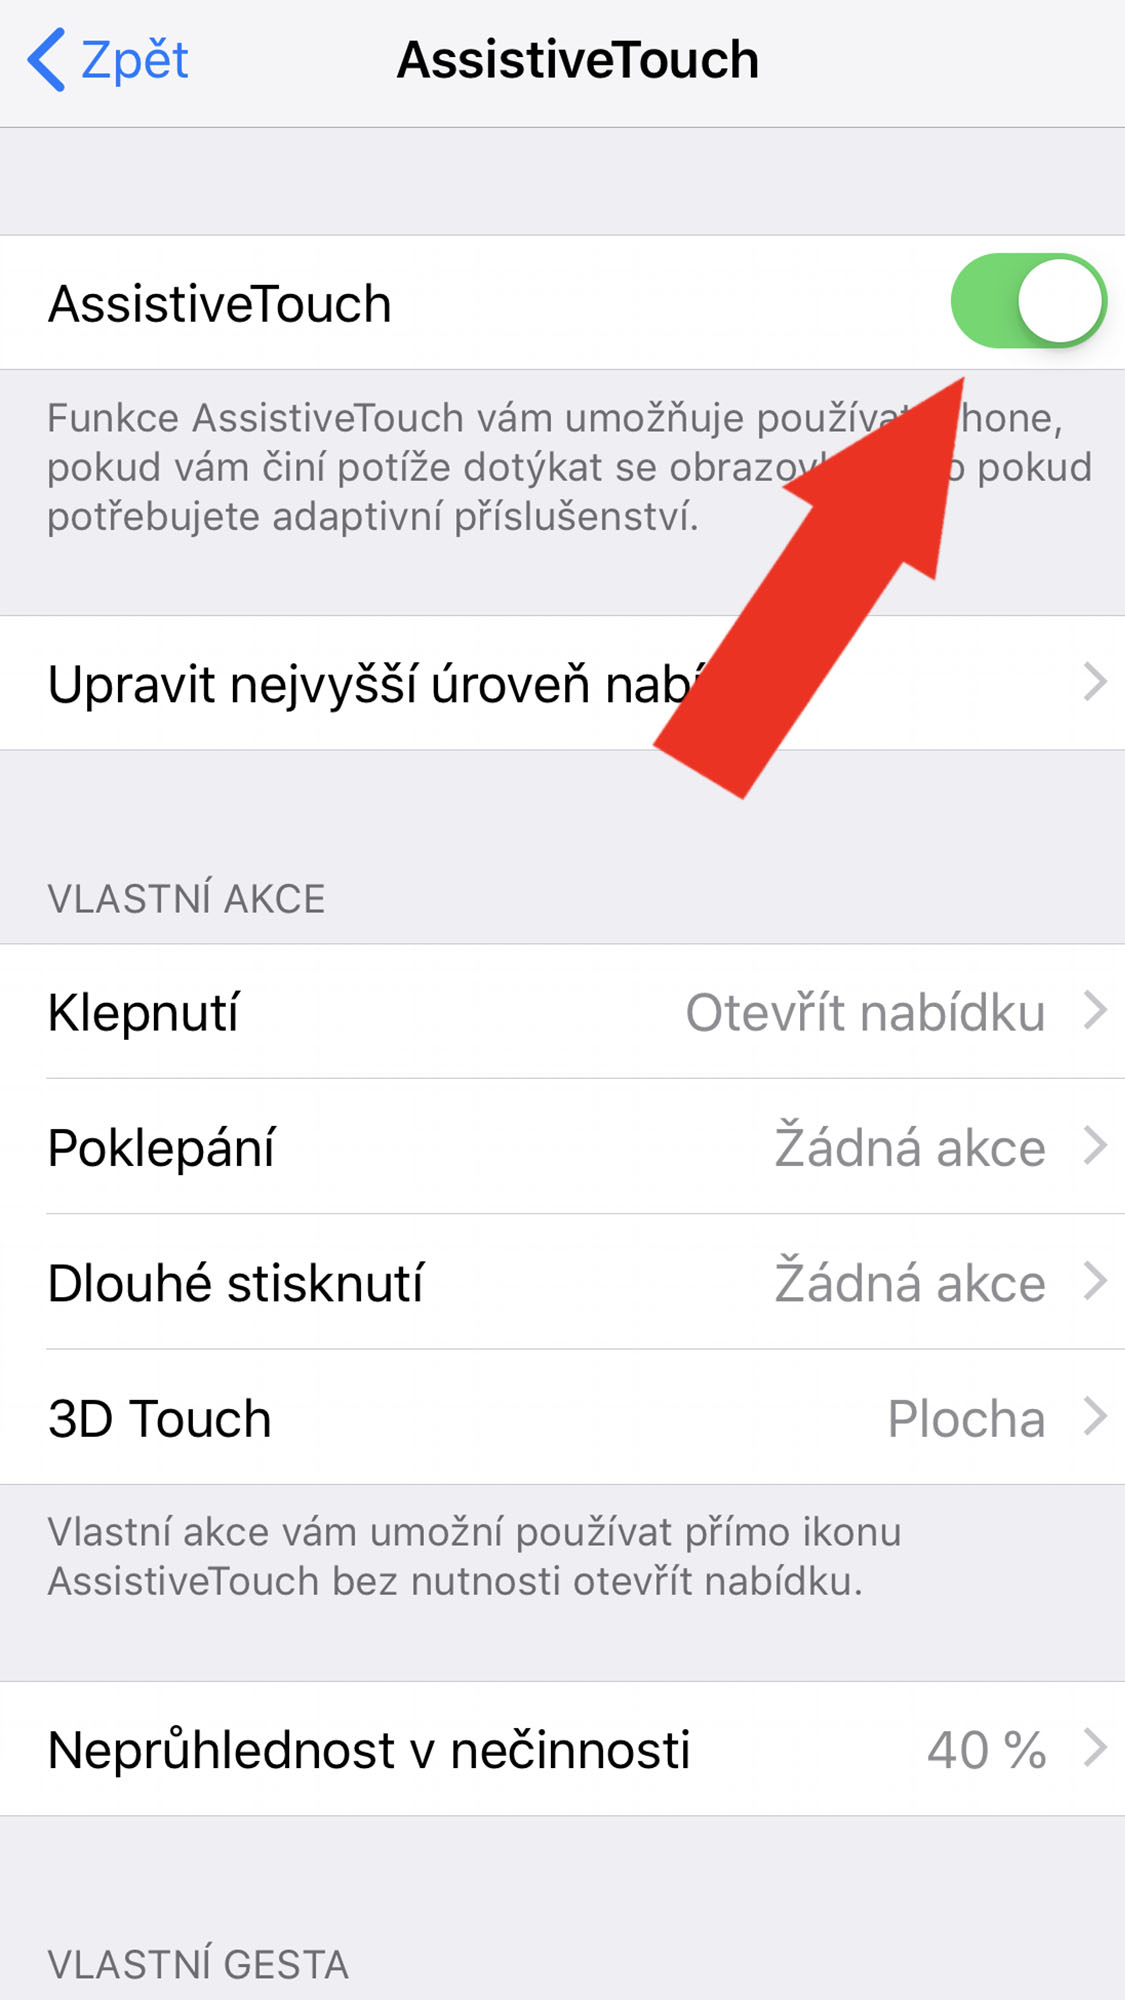 AssistiveTouch_5